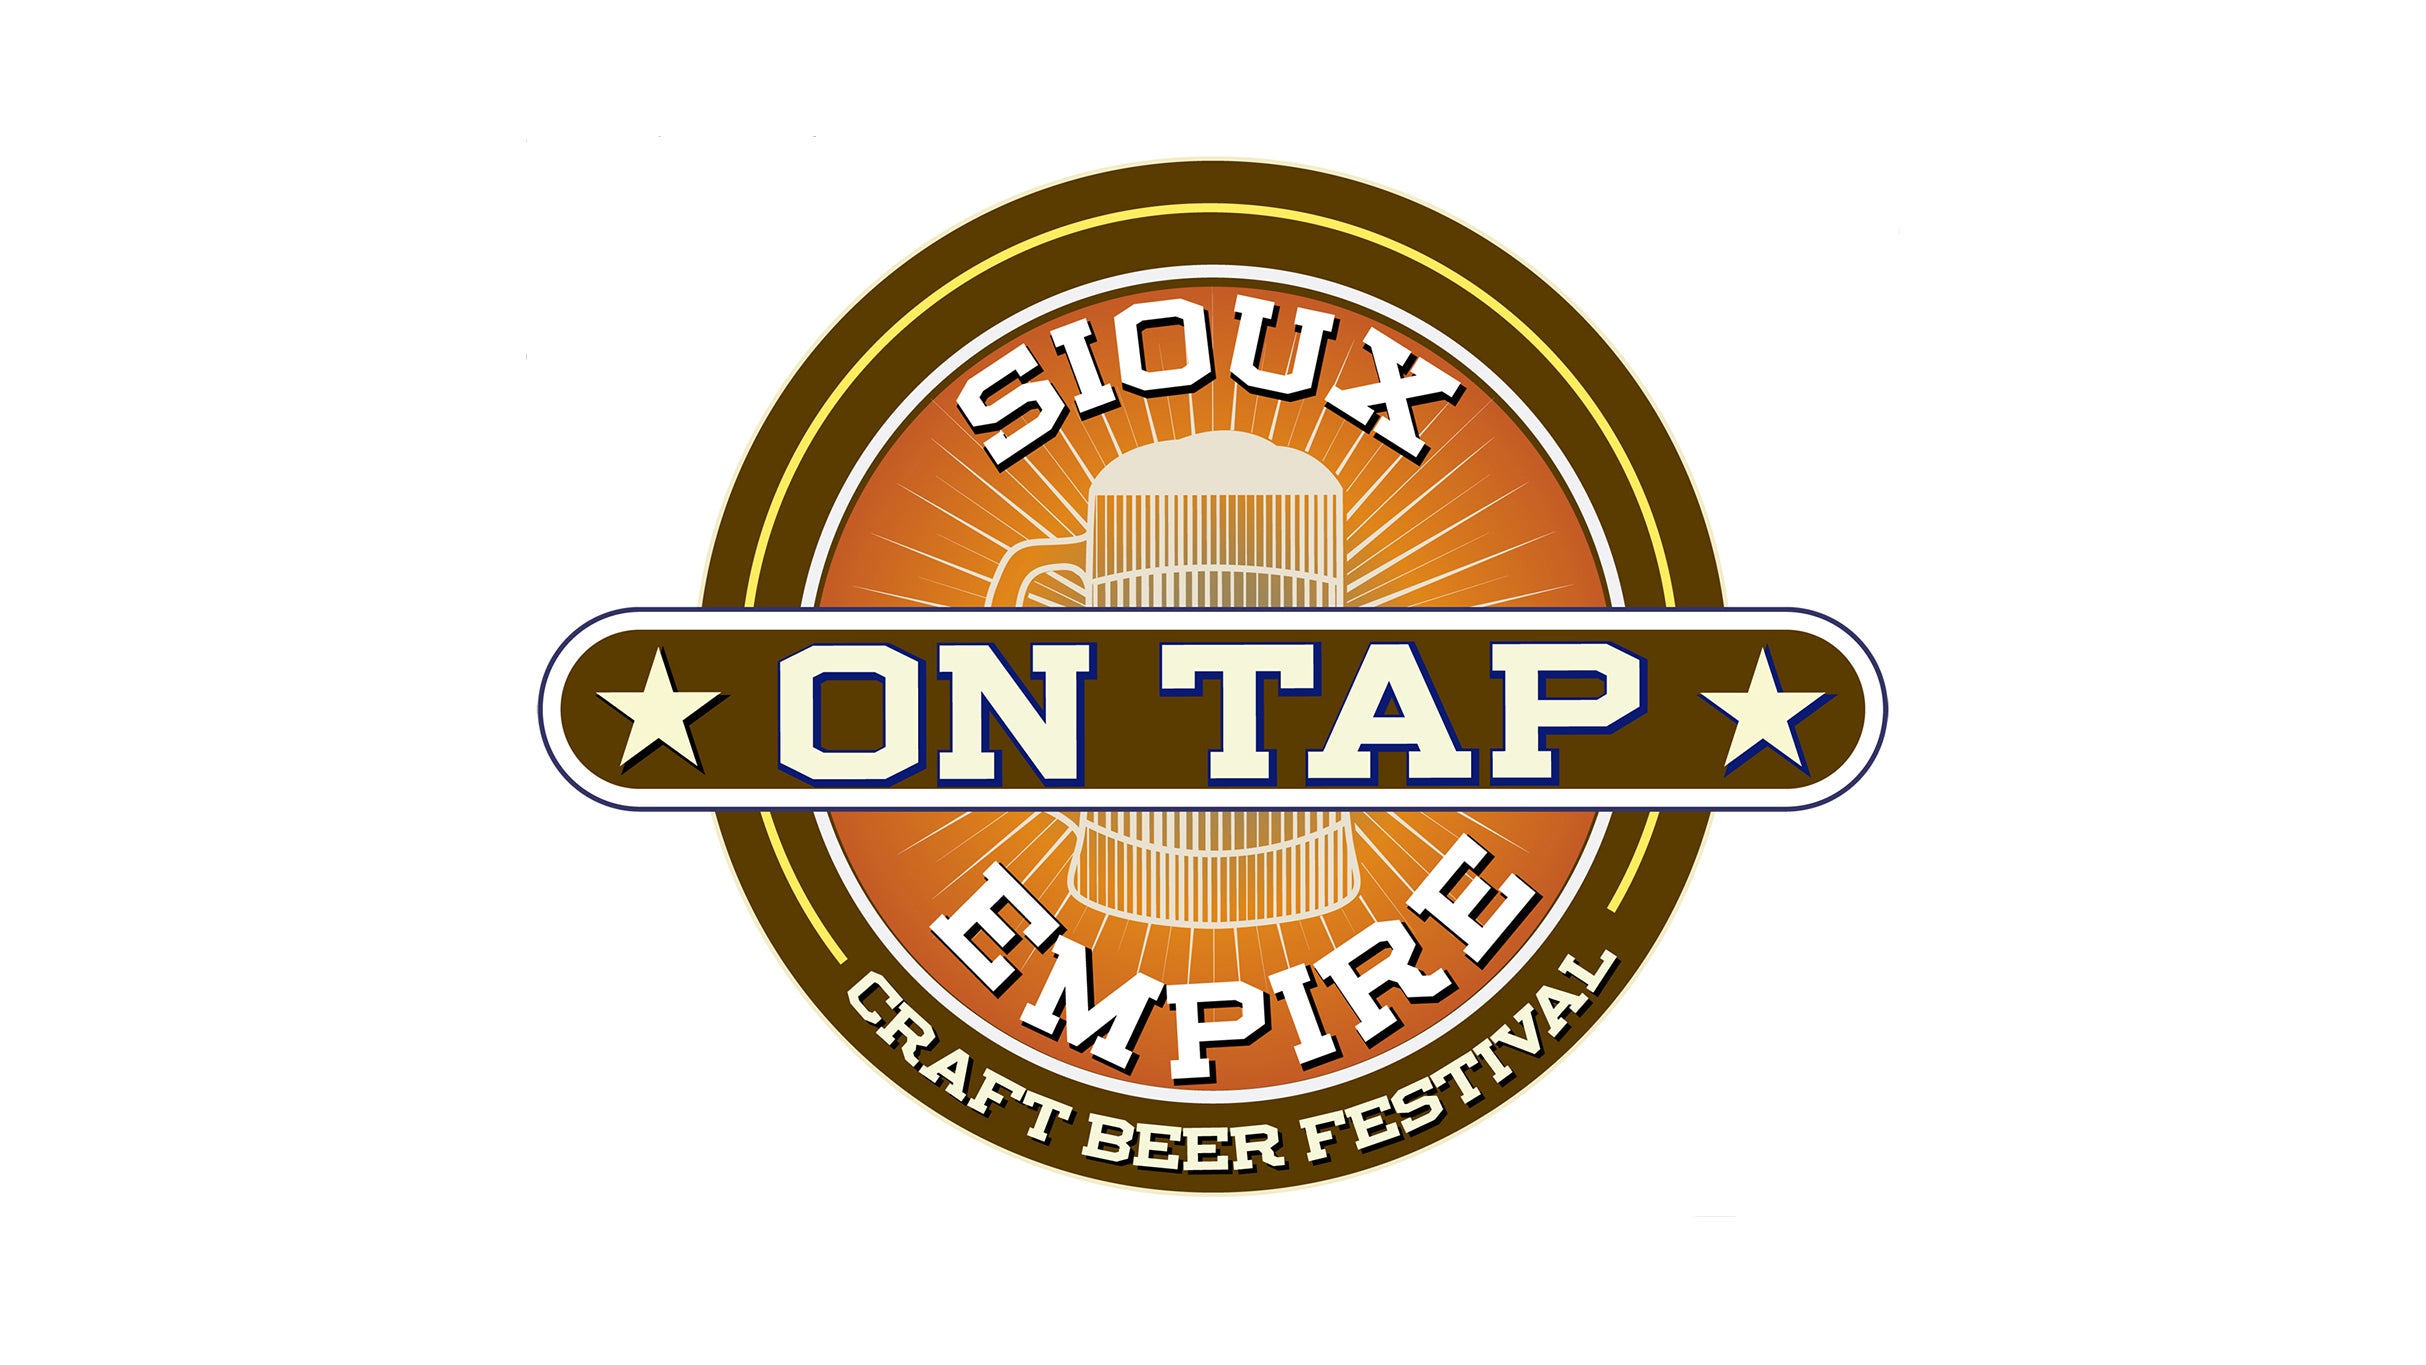 Sioux Empire On Tap in Sioux Falls promo photo for Exclusive presale offer code